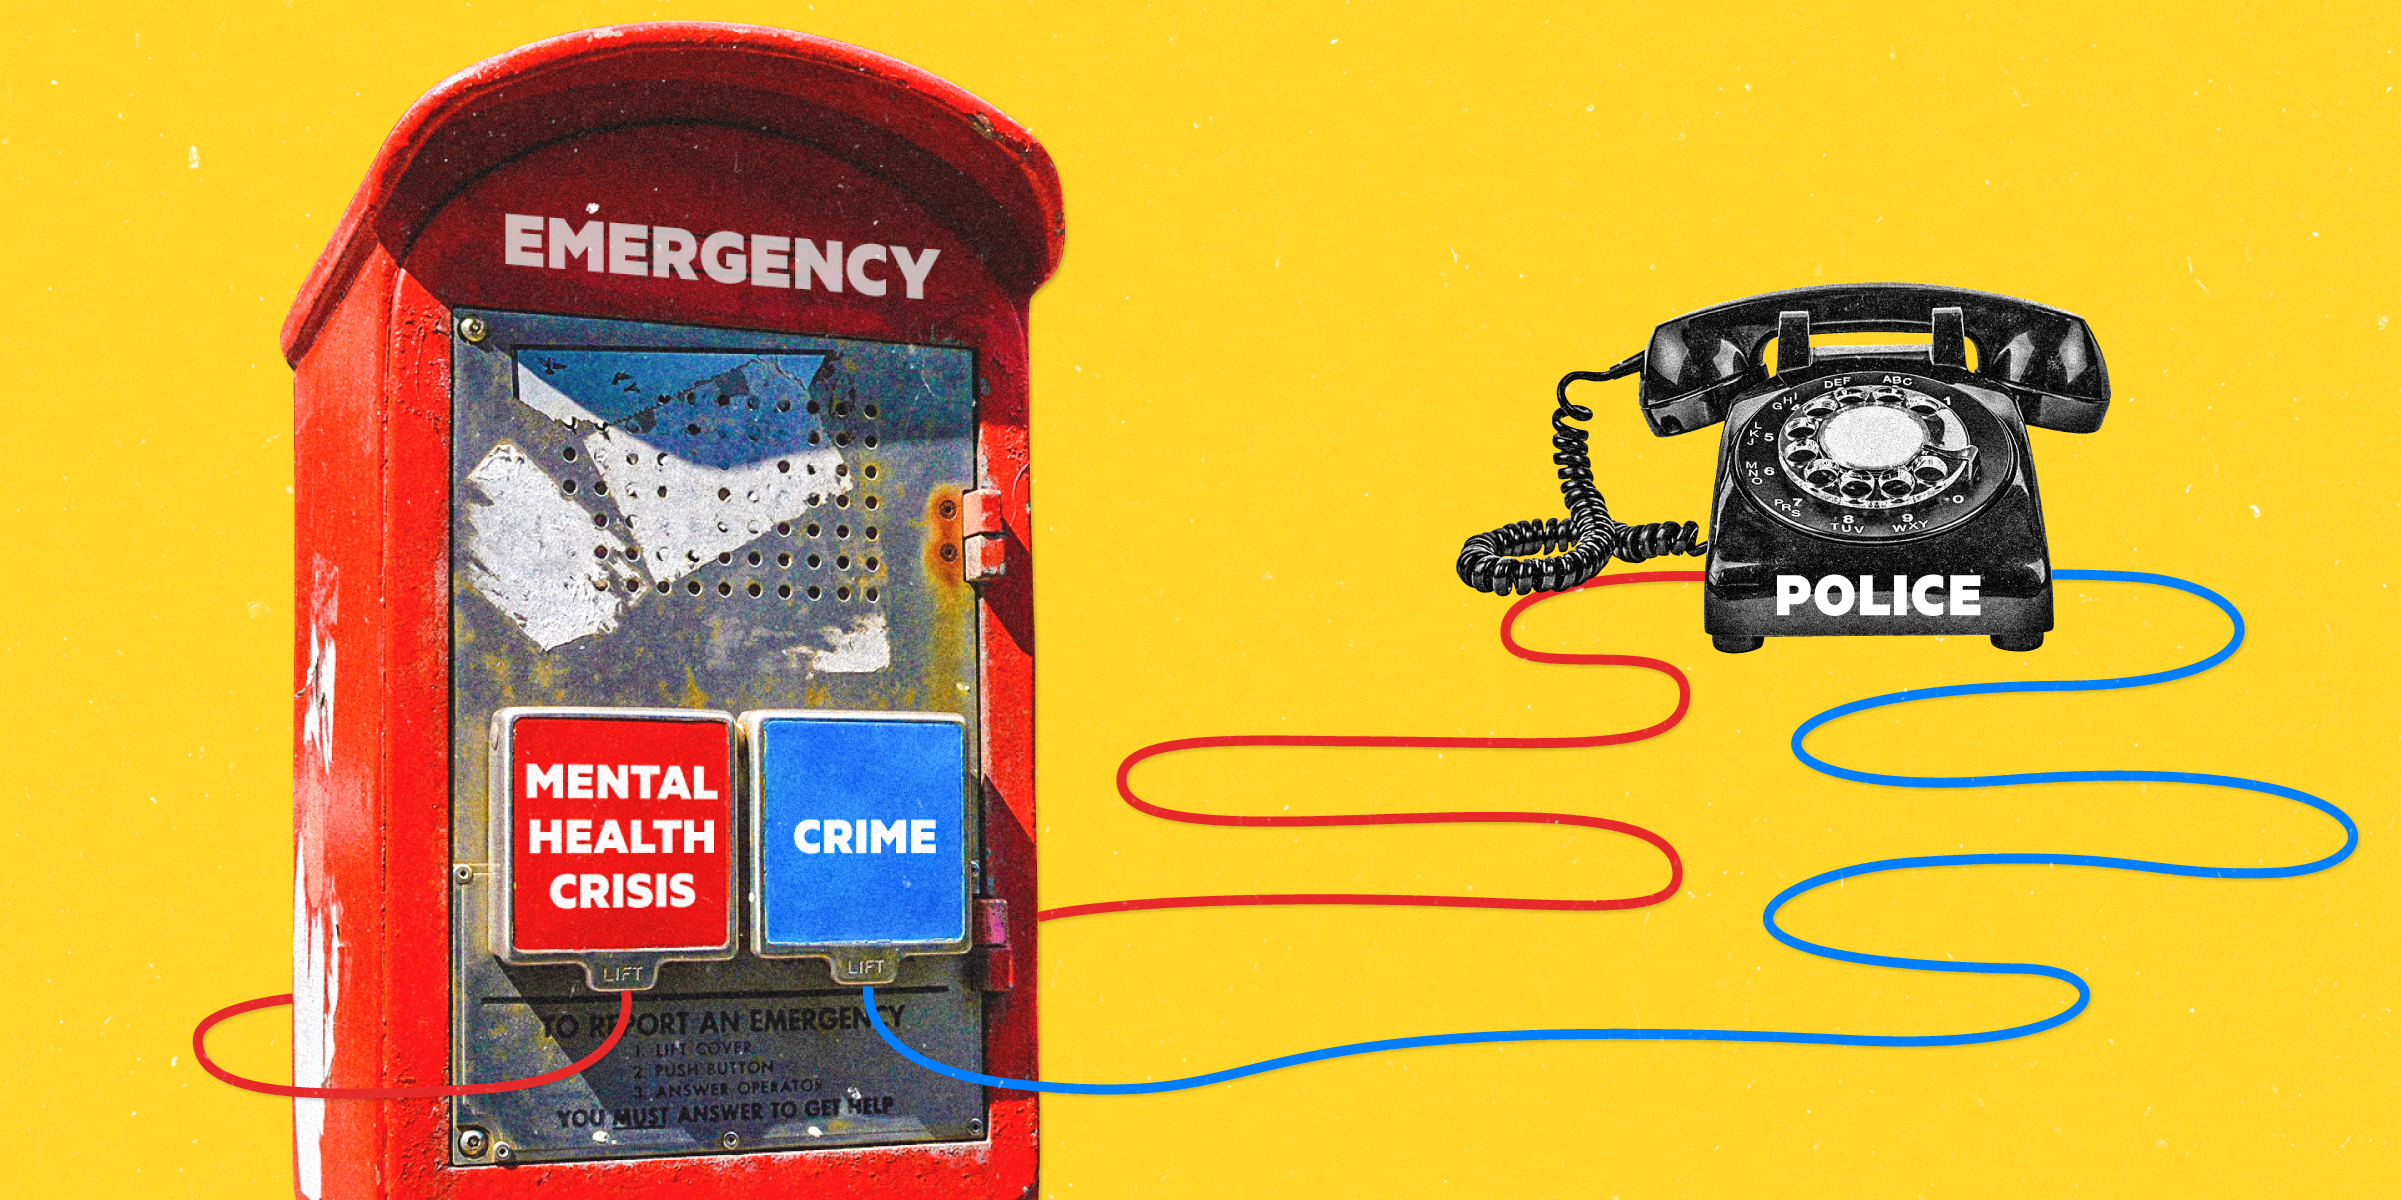 Emergency call box with one button labeled "mental health crisis" and another button labeled "crime"; both buttons have wires directed towards one phone labeled "police" on a yellow background